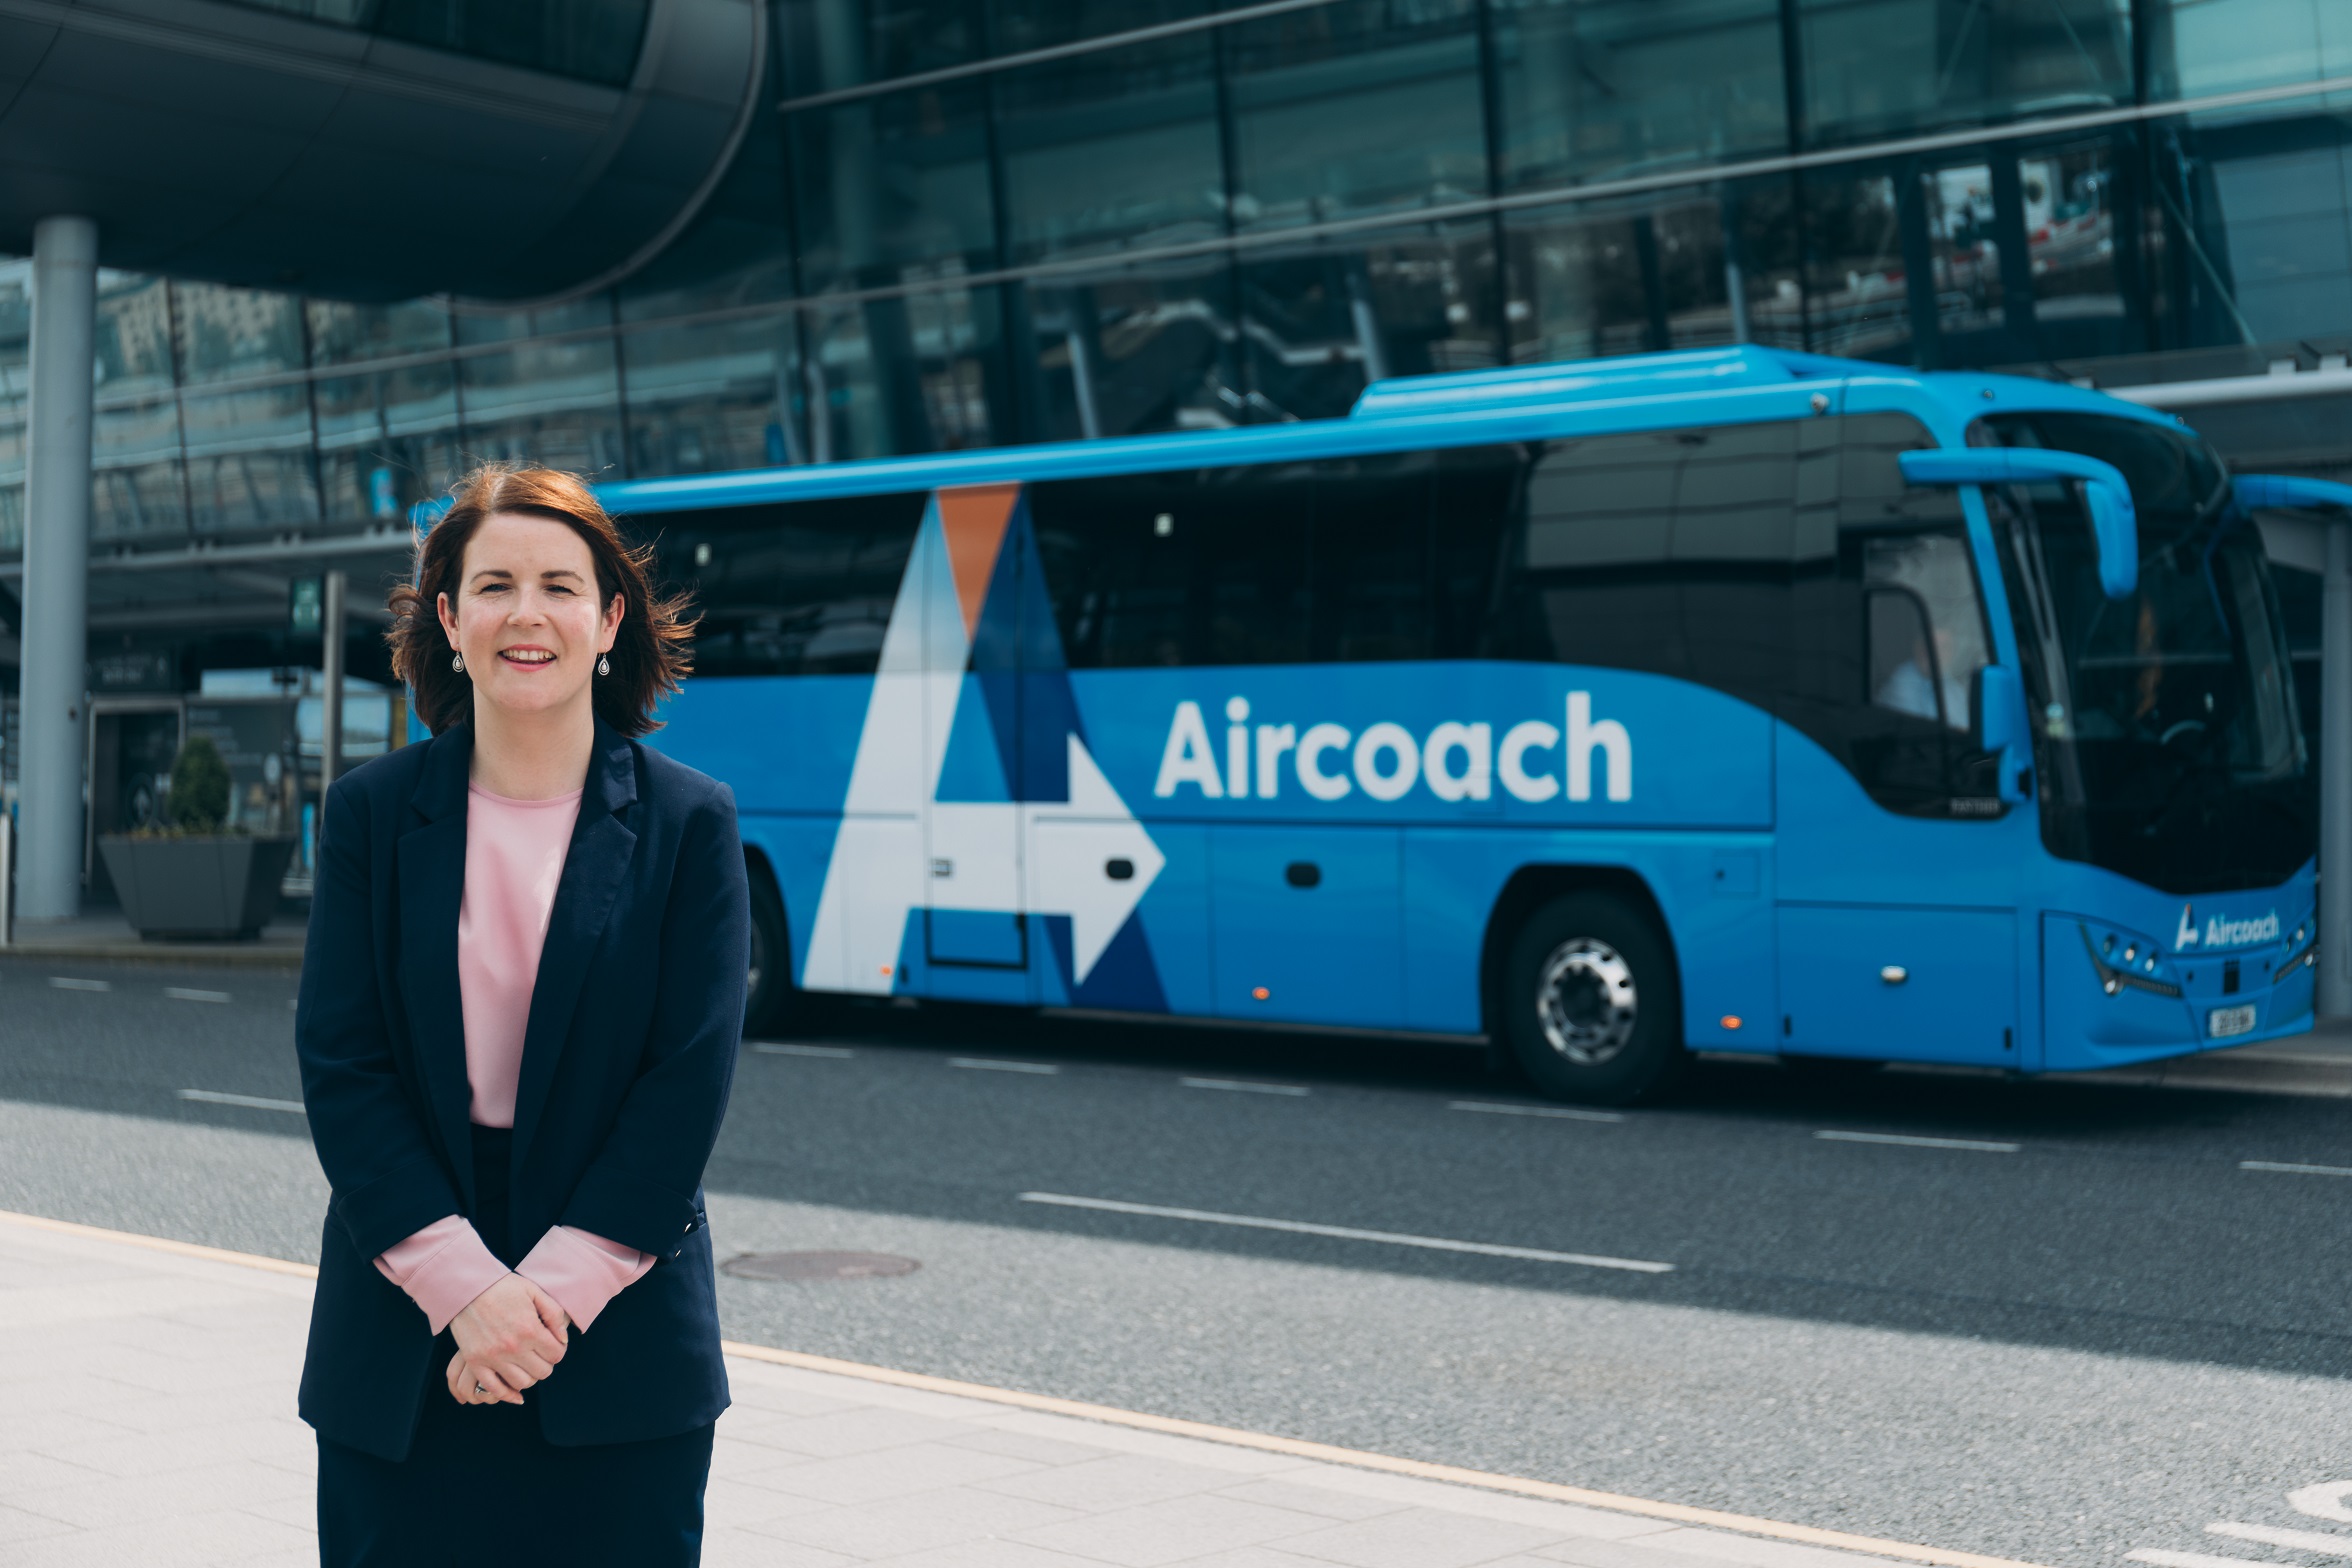 Aircoach purchases Airporter